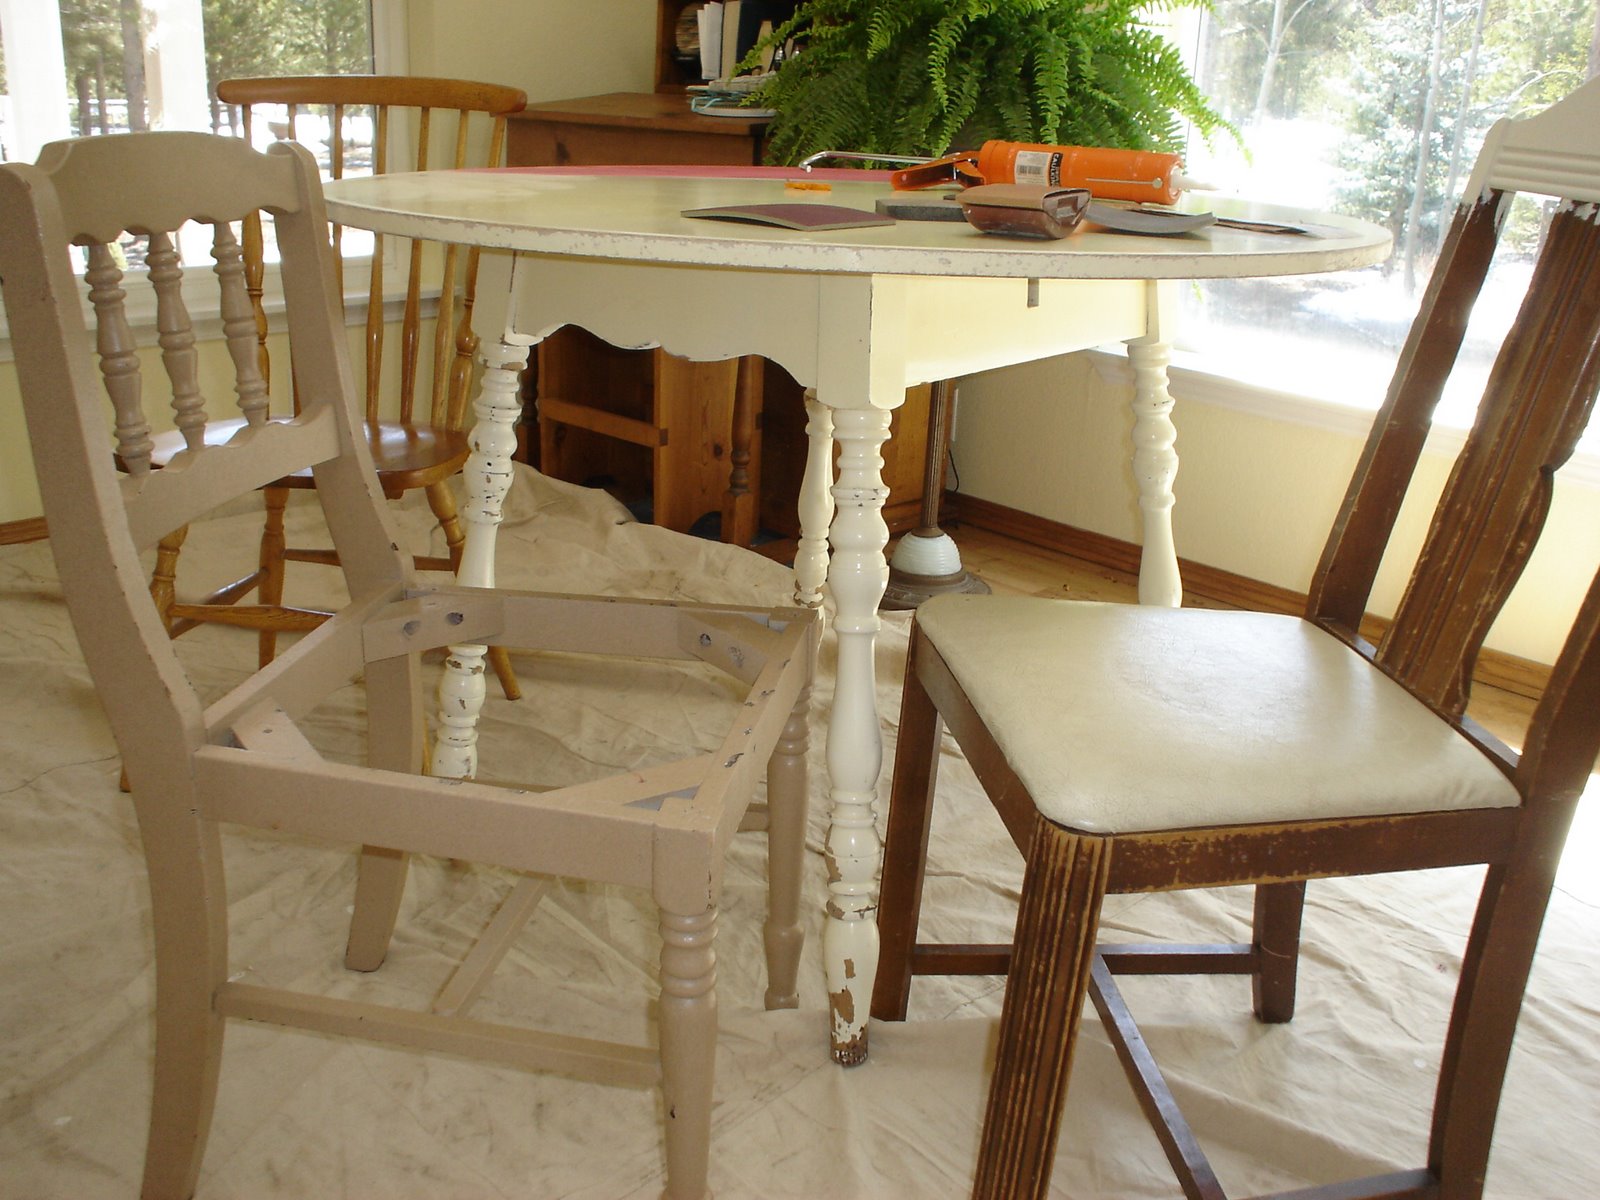 [KITCHEN+TABLE+AND+CHAIRS.jpg]